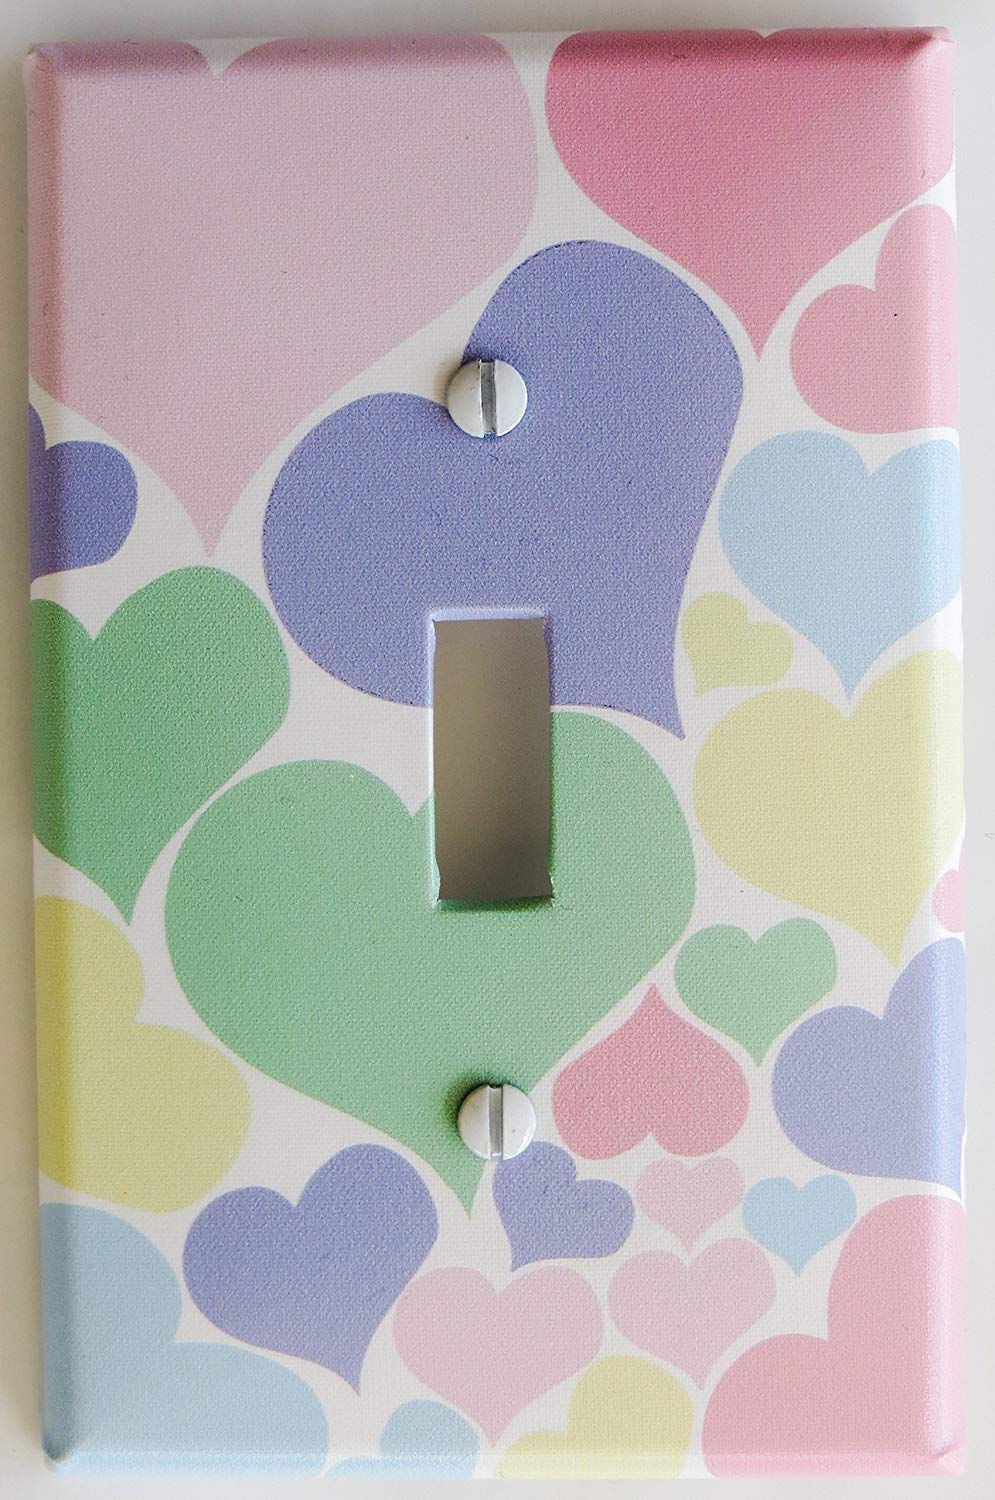 Pastel Heart Light Switch Plate Cover in pink, blue, purple, yellow, and green